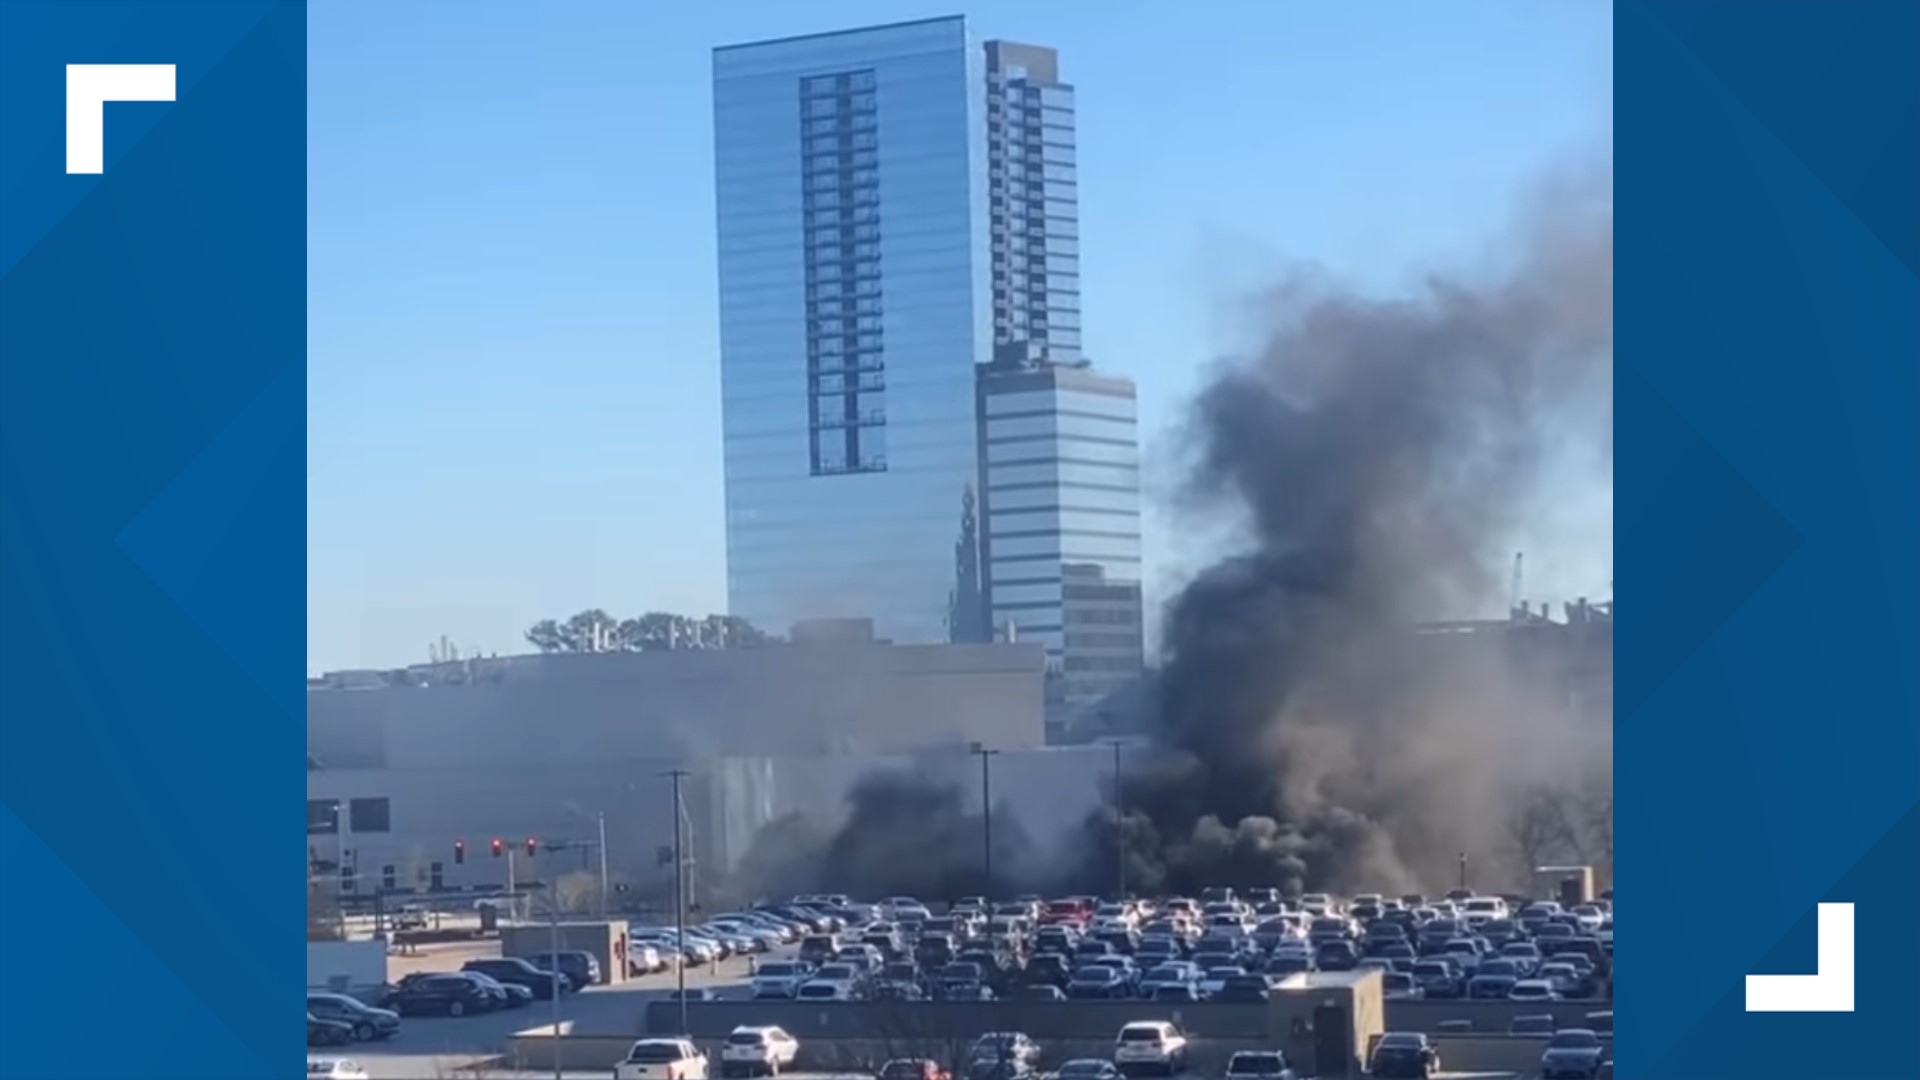 A spokesperson for the department said there are "materials" on fire inside The Whitley Hotel parking deck off Peachtree Road.